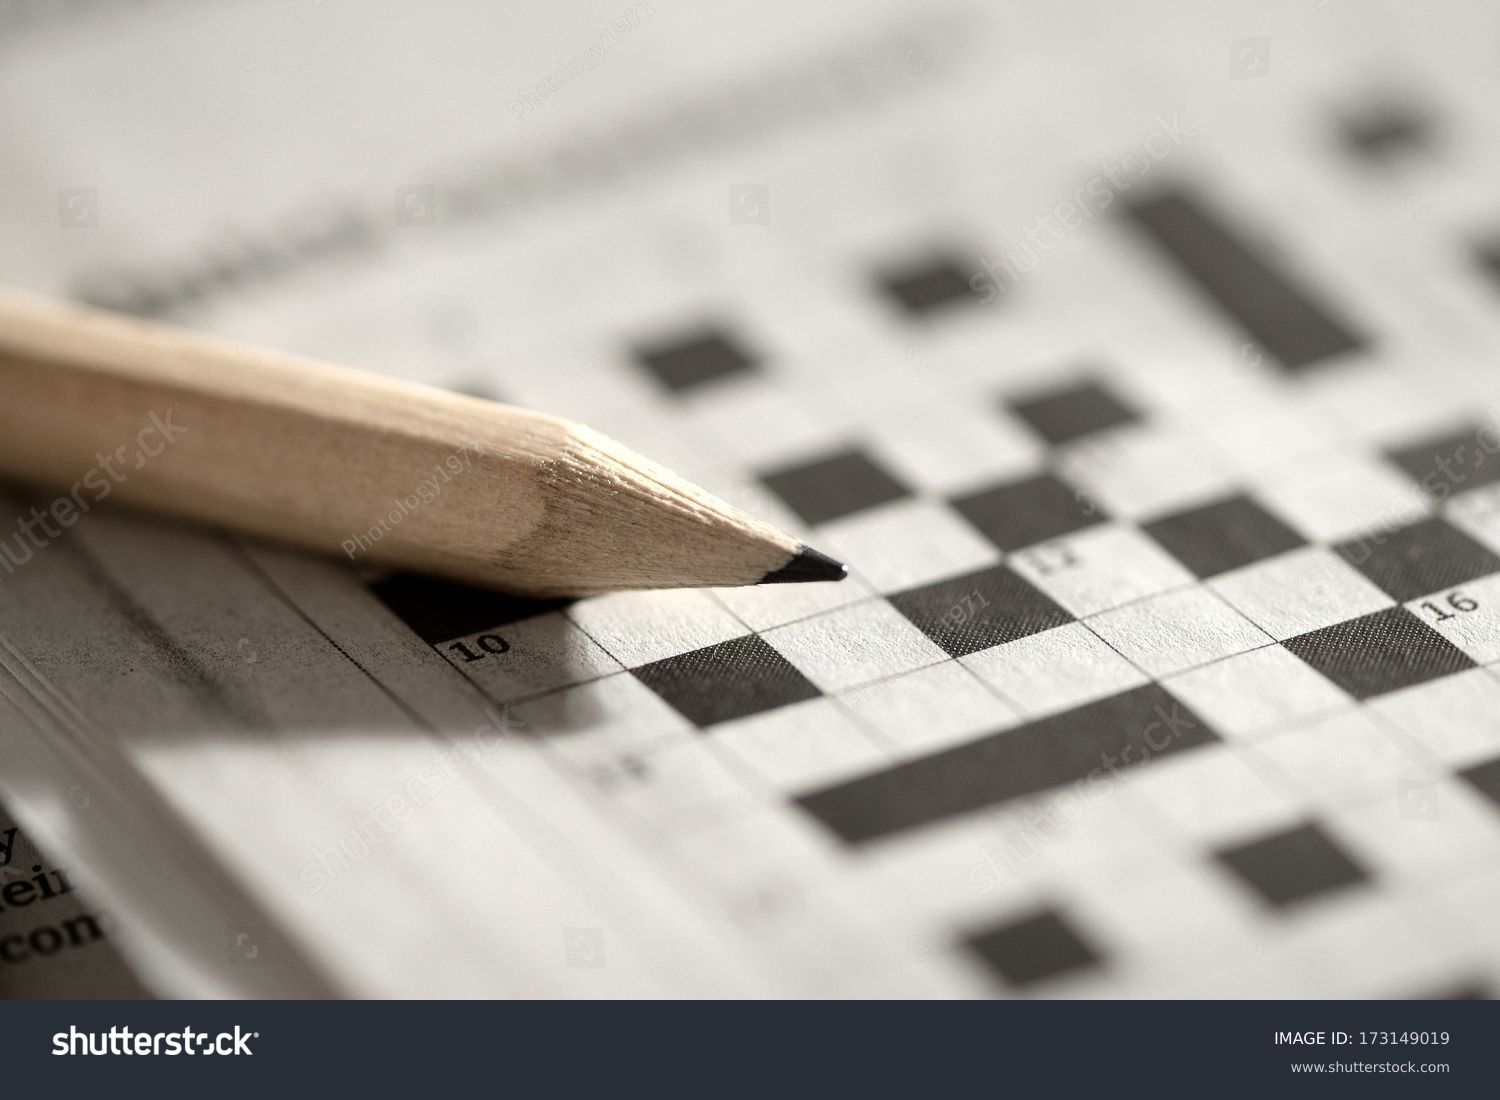 Close up view of a blank crossword puzzle grid with black and white squares and a pencil #173149019